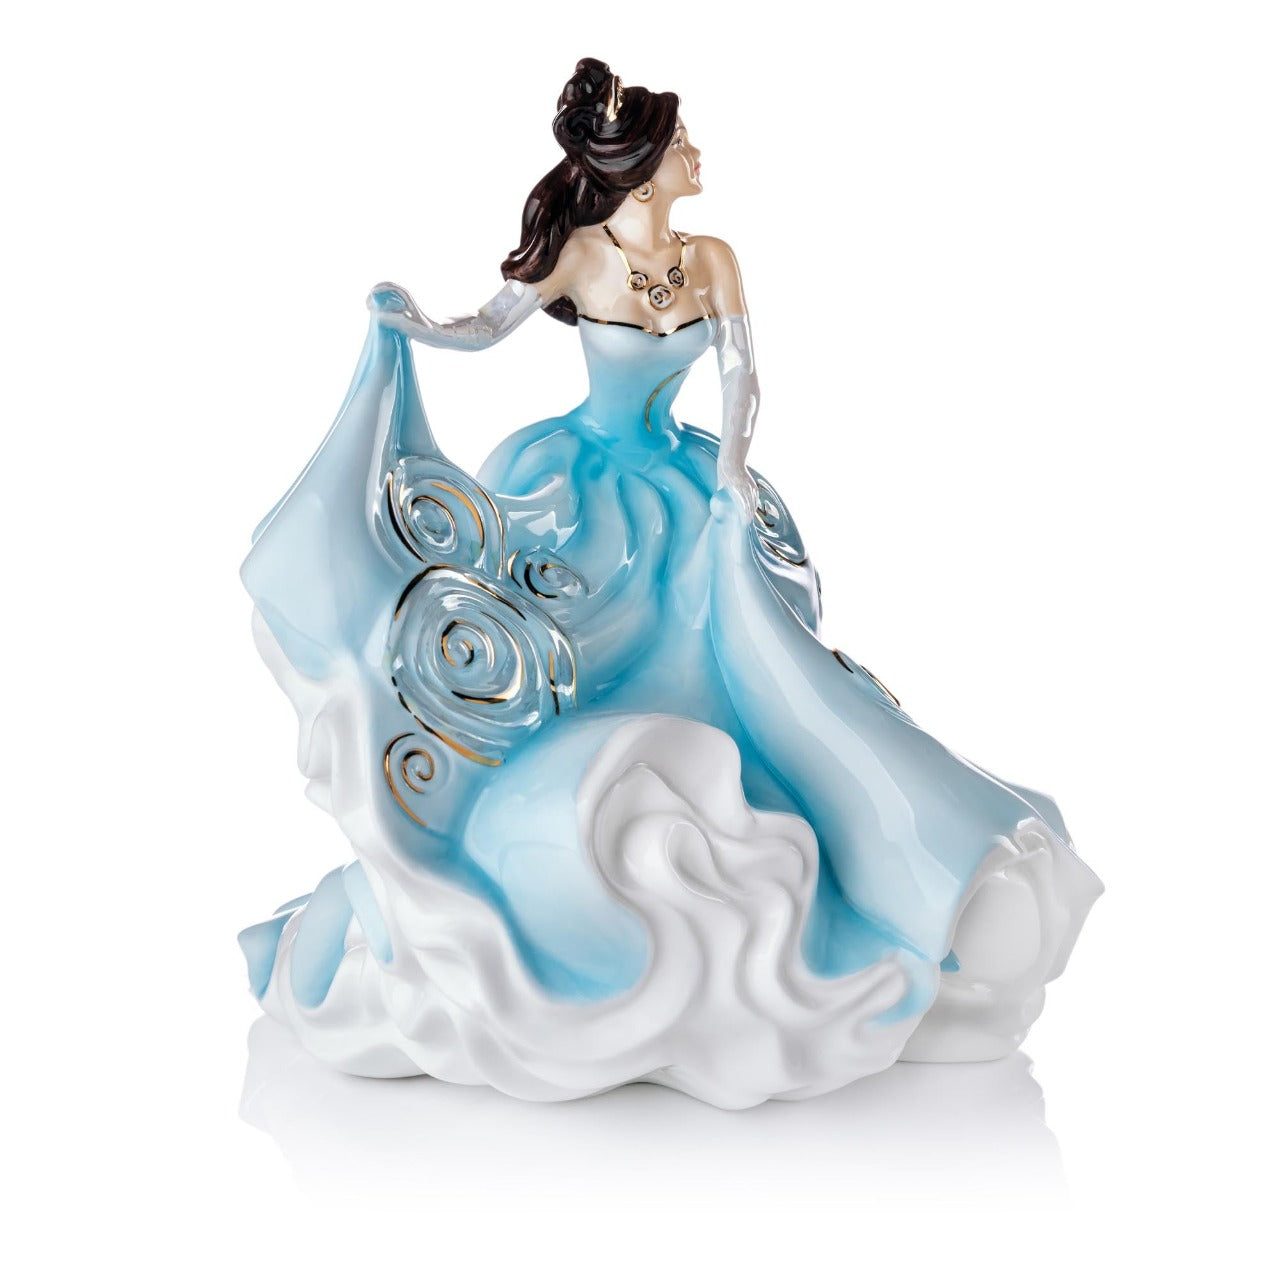 English Ladies Heavenly Charm  The latest figurine to join our English Ladies collection is Heavenly Charm. This beautiful figurine is part of our Charm range following the same hand-crafted design as Golden Charm and Sweet Charm. This gorgeous figurine is dressed pastel blue gown which is detailed with real gold highlights that glisten in the light.